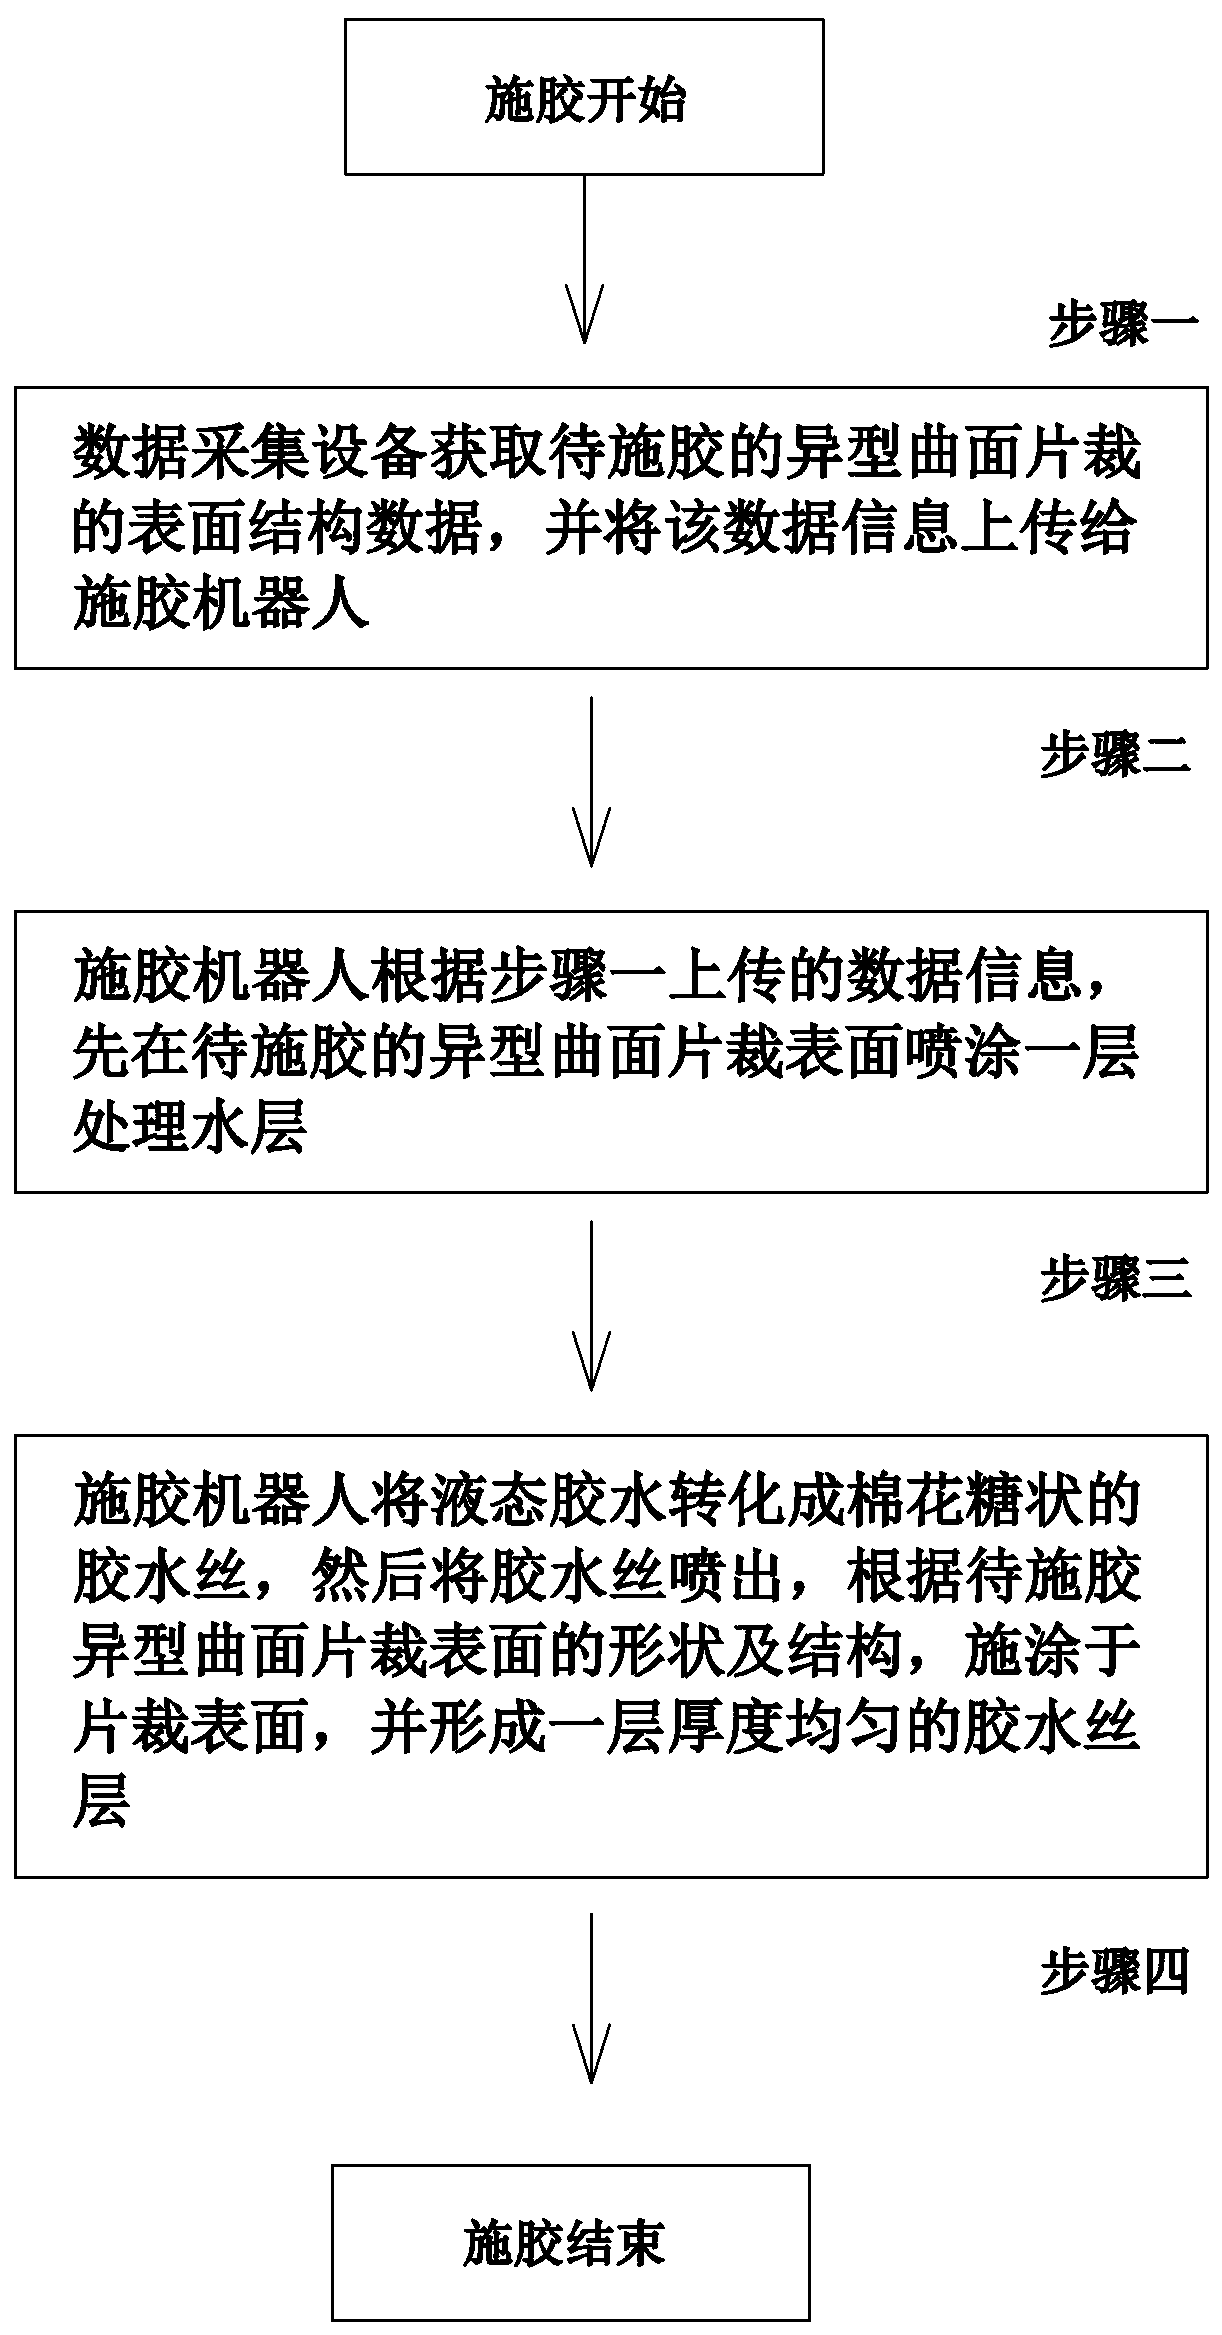 Intelligent glue application technology and equipment for special-shaped curved cutting piece for preventing glue solution accumulation and equipment thereof